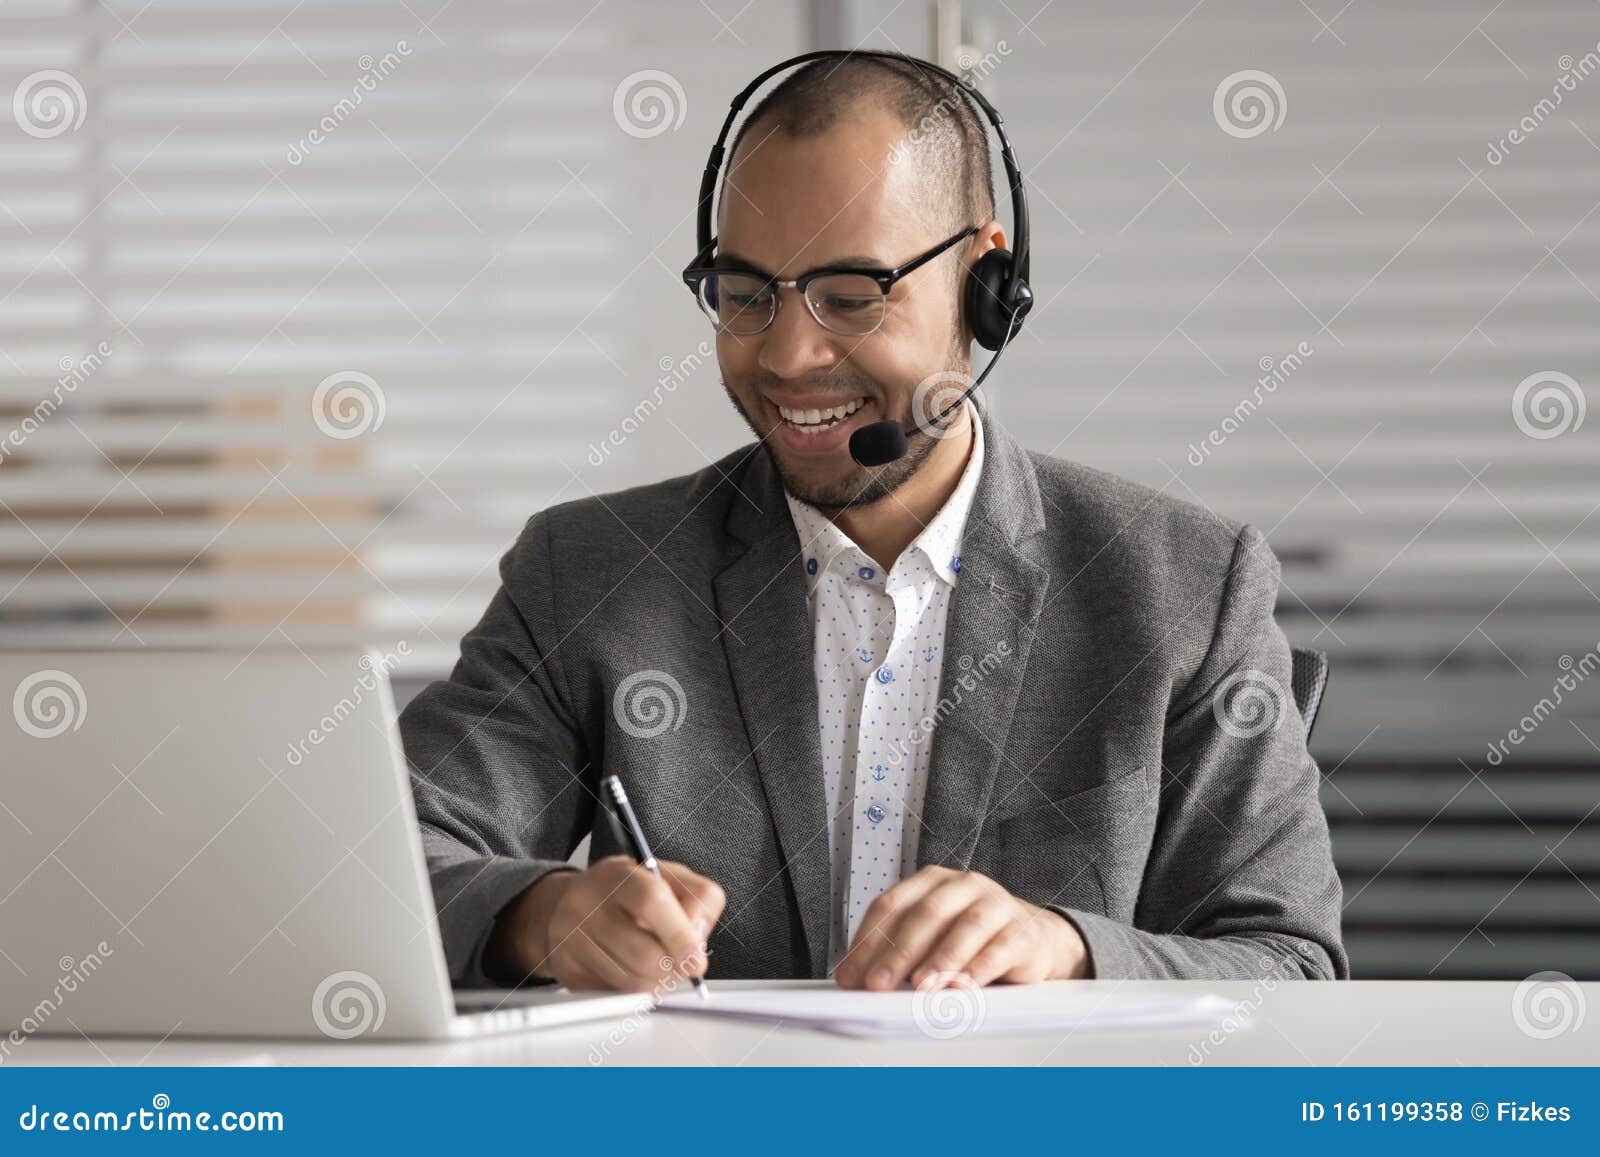 happy african american employee in headset making notes, using laptop